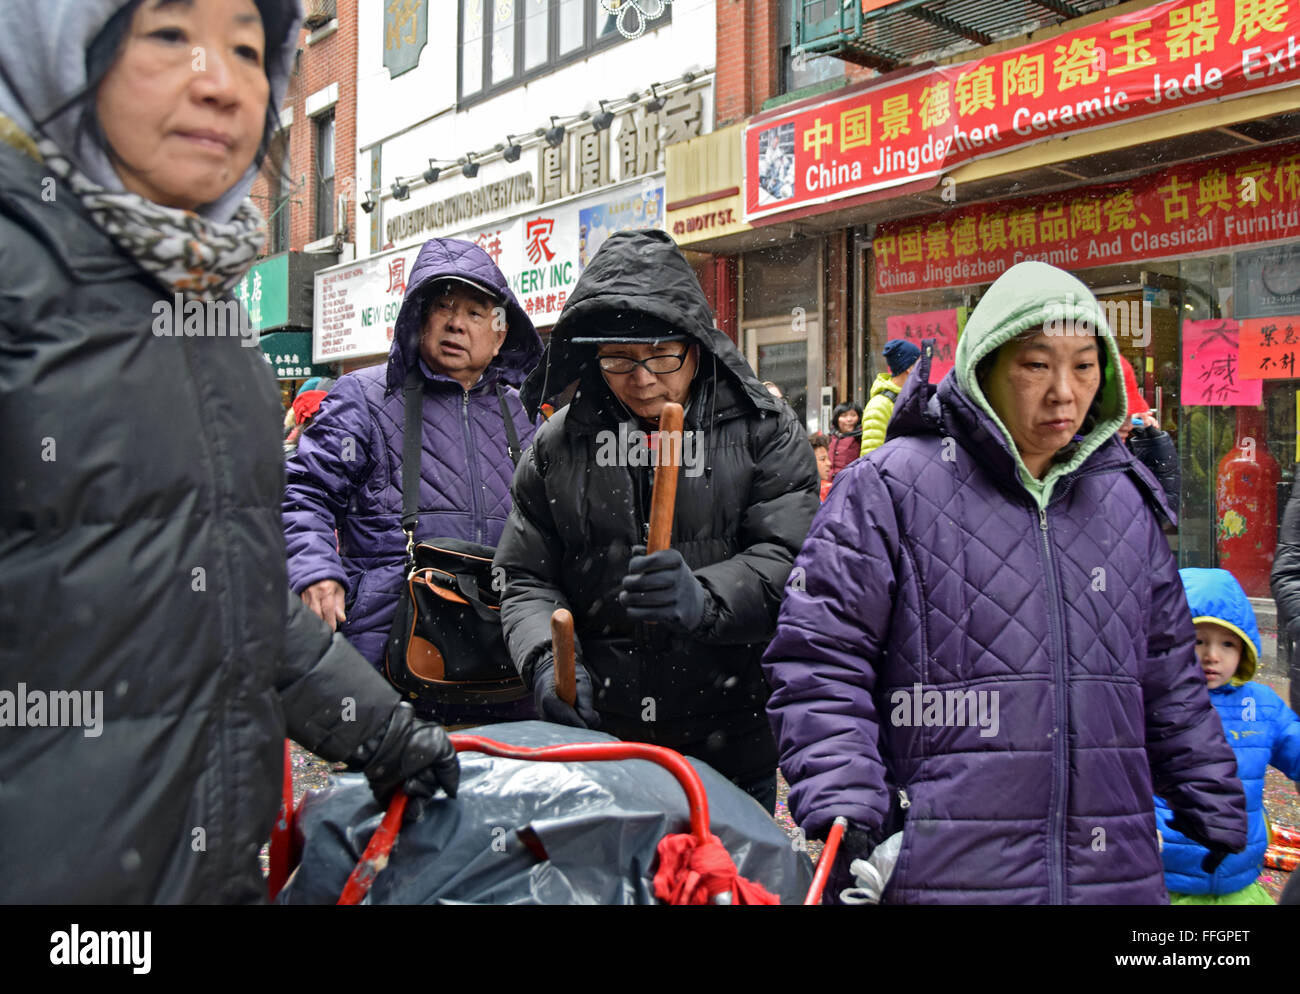 Four senior citizens play music in a parade for Chinese Lunar New Years 2016 on Mott St. in CHinatown, New York City Stock Photo